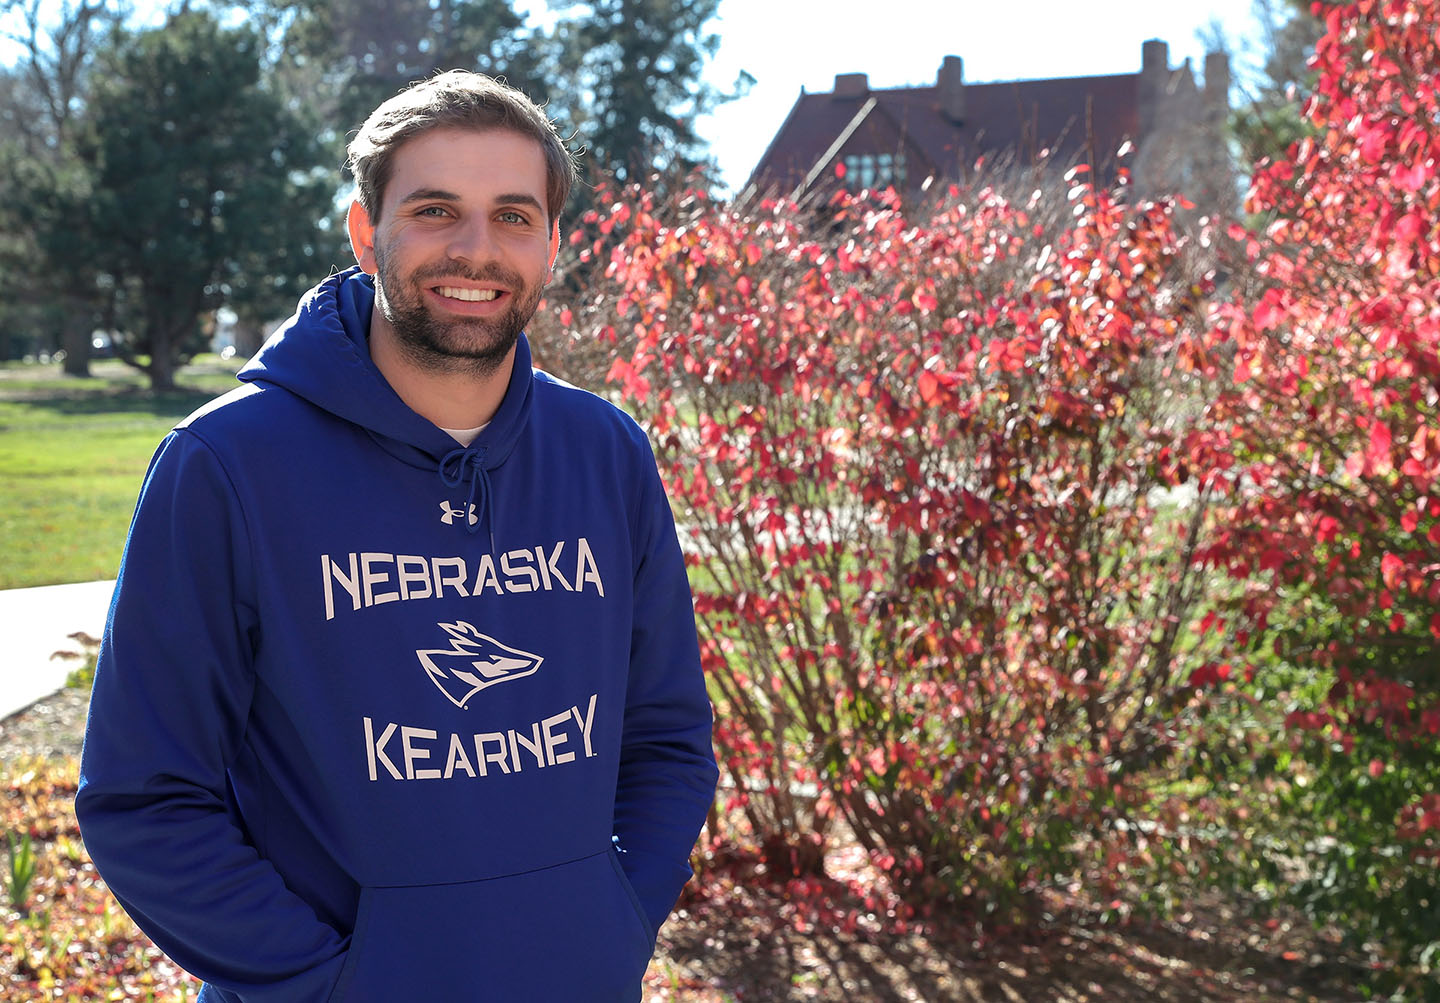 Aidan Weidner is studying elementary education with minors in special education and coaching at UNK. He’s also involved in numerous campus organizations. (Photo by Erika Pritchard, UNK Communications)